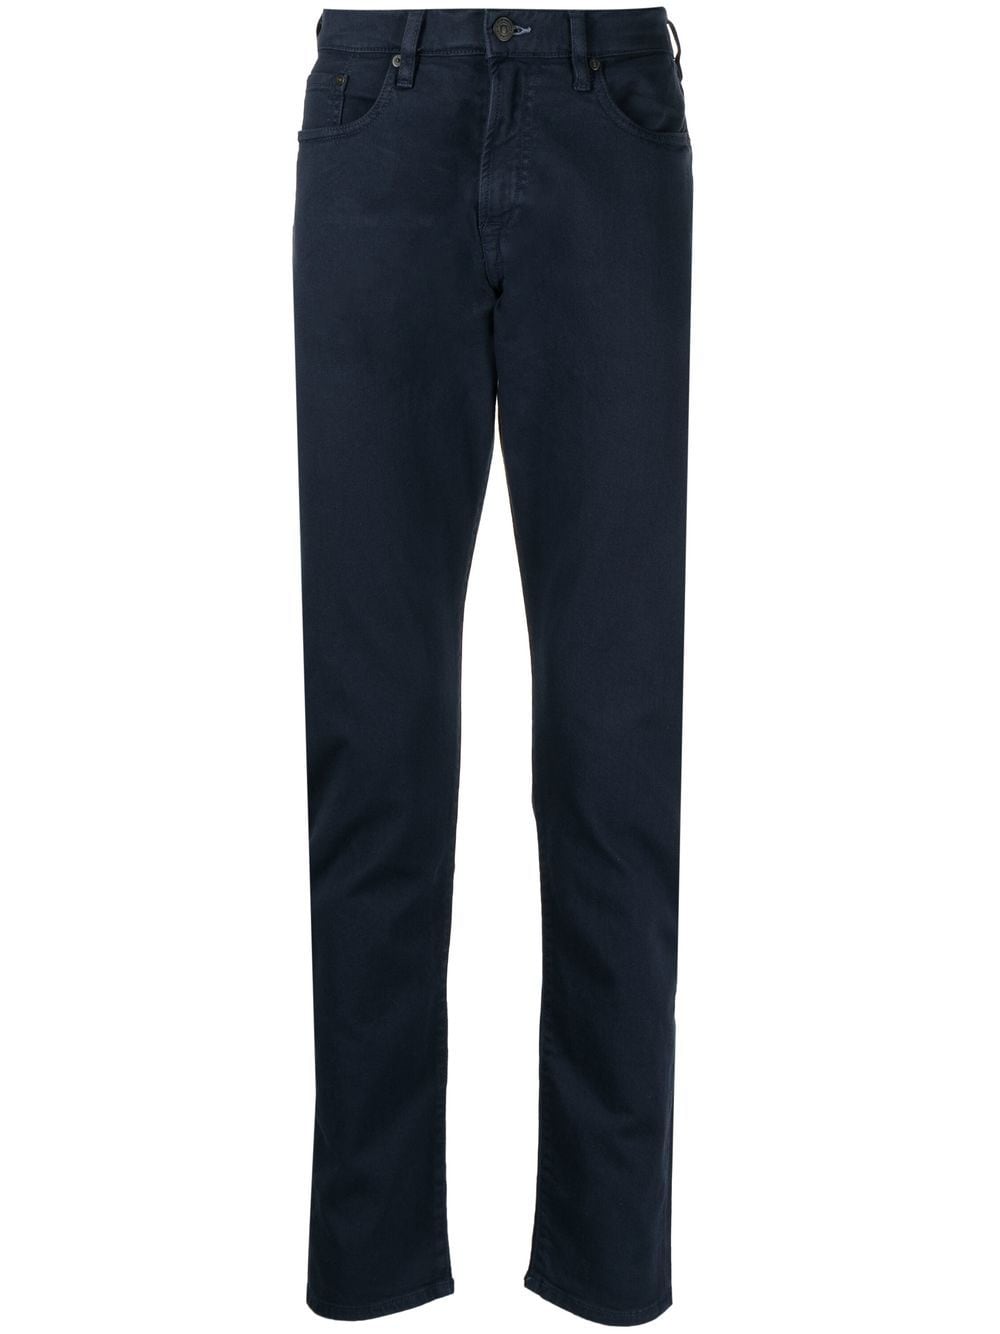 slim-fit garment-dyed jeans